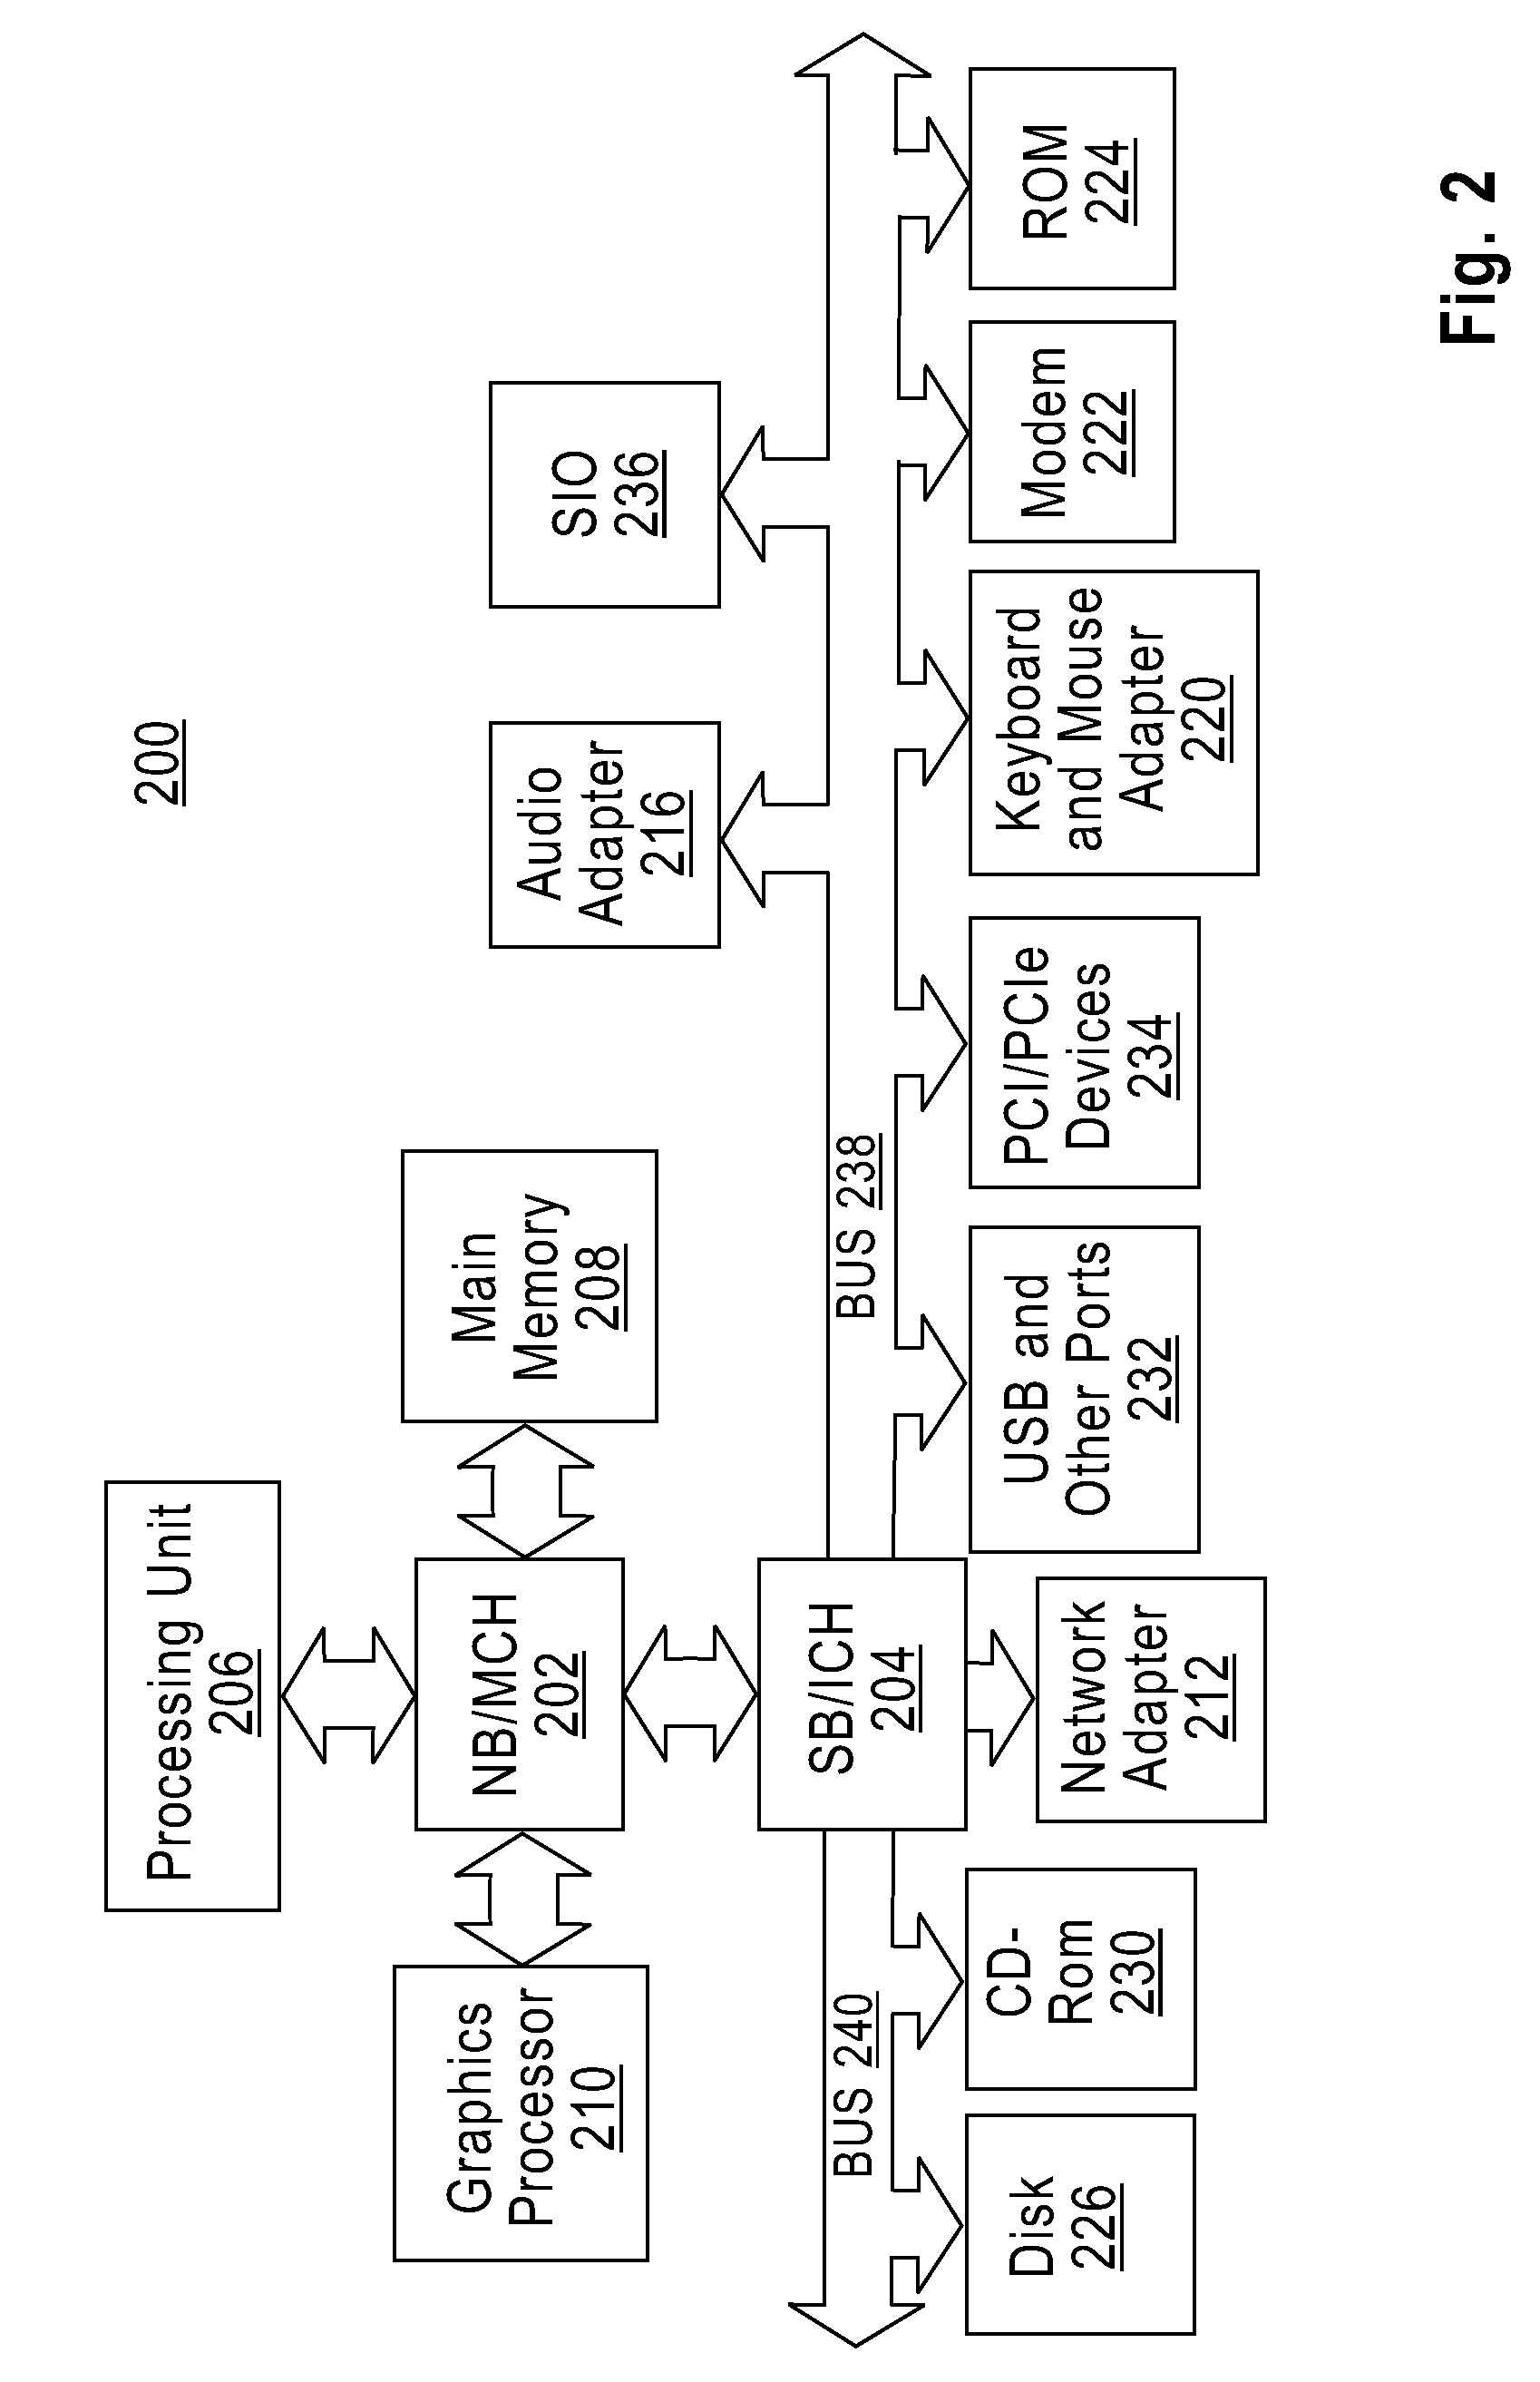 Method and apparatus for policy-based provisioning in a virtualized service delivery environment